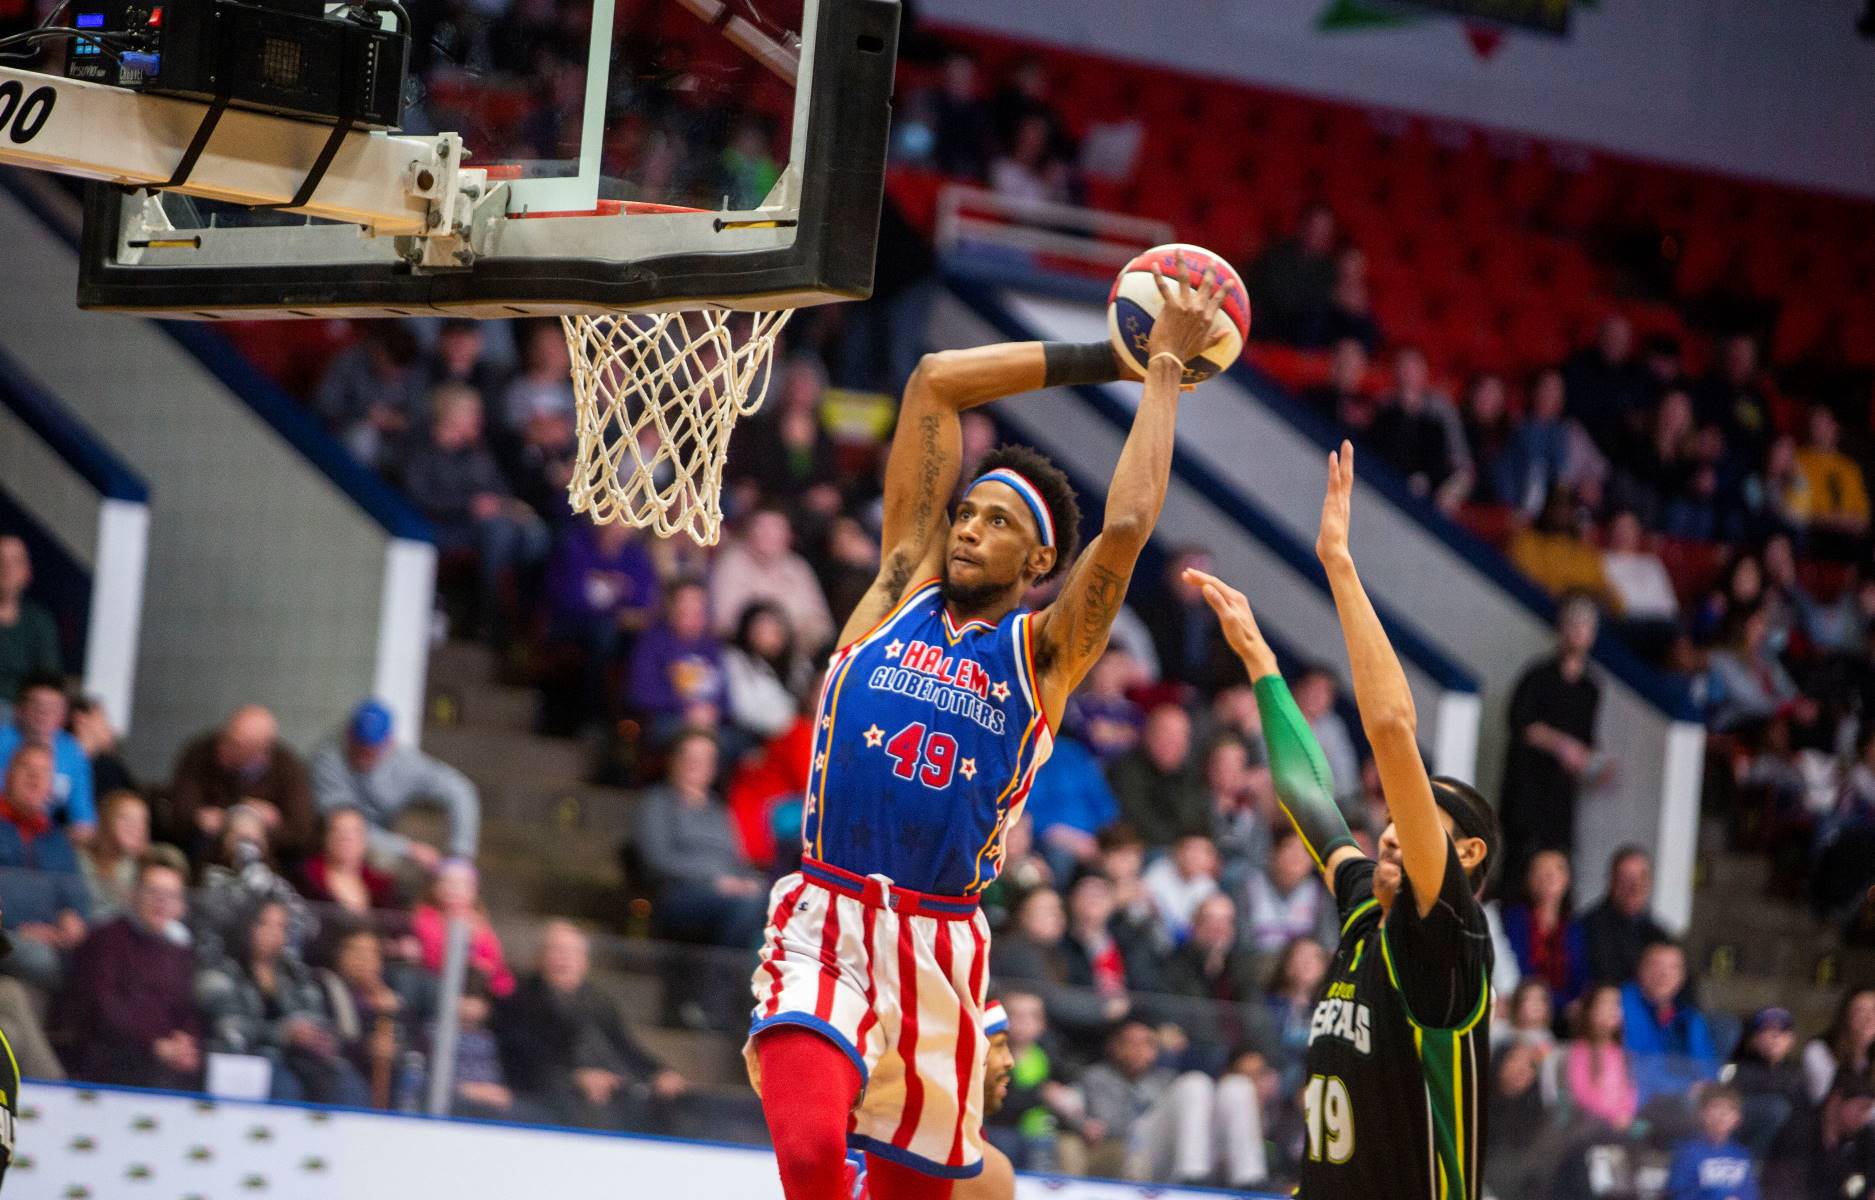 The Mind-Blowing Salary Of The Highest Paid Harlem Globetrotter Player Revealed!